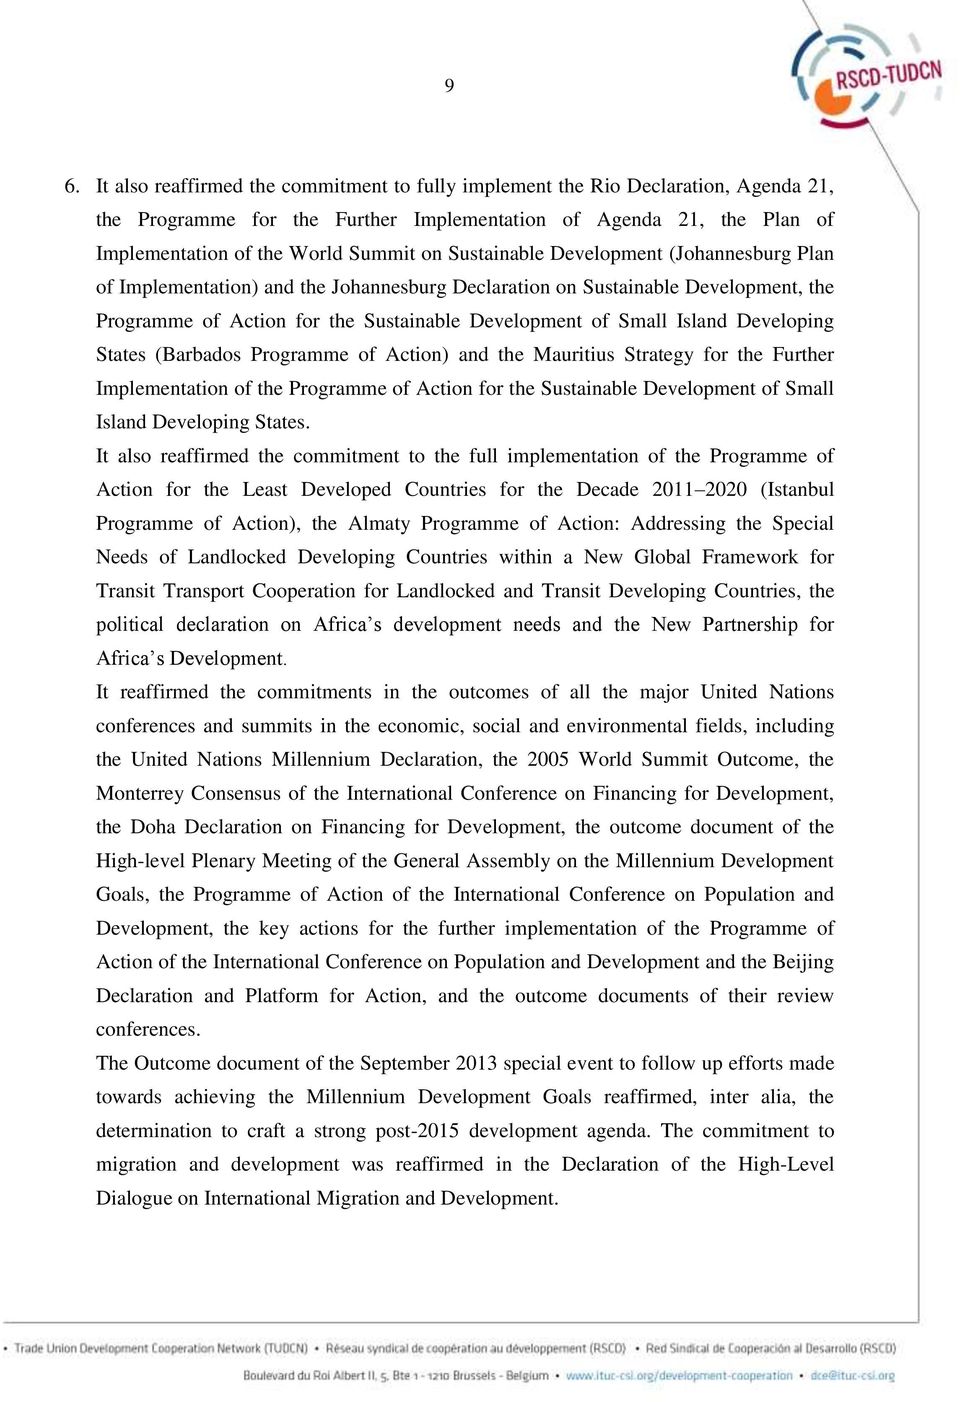 Developing States (Barbados Programme of Action) and the Mauritius Strategy for the Further Implementation of the Programme of Action for the Sustainable Development of Small Island Developing States.